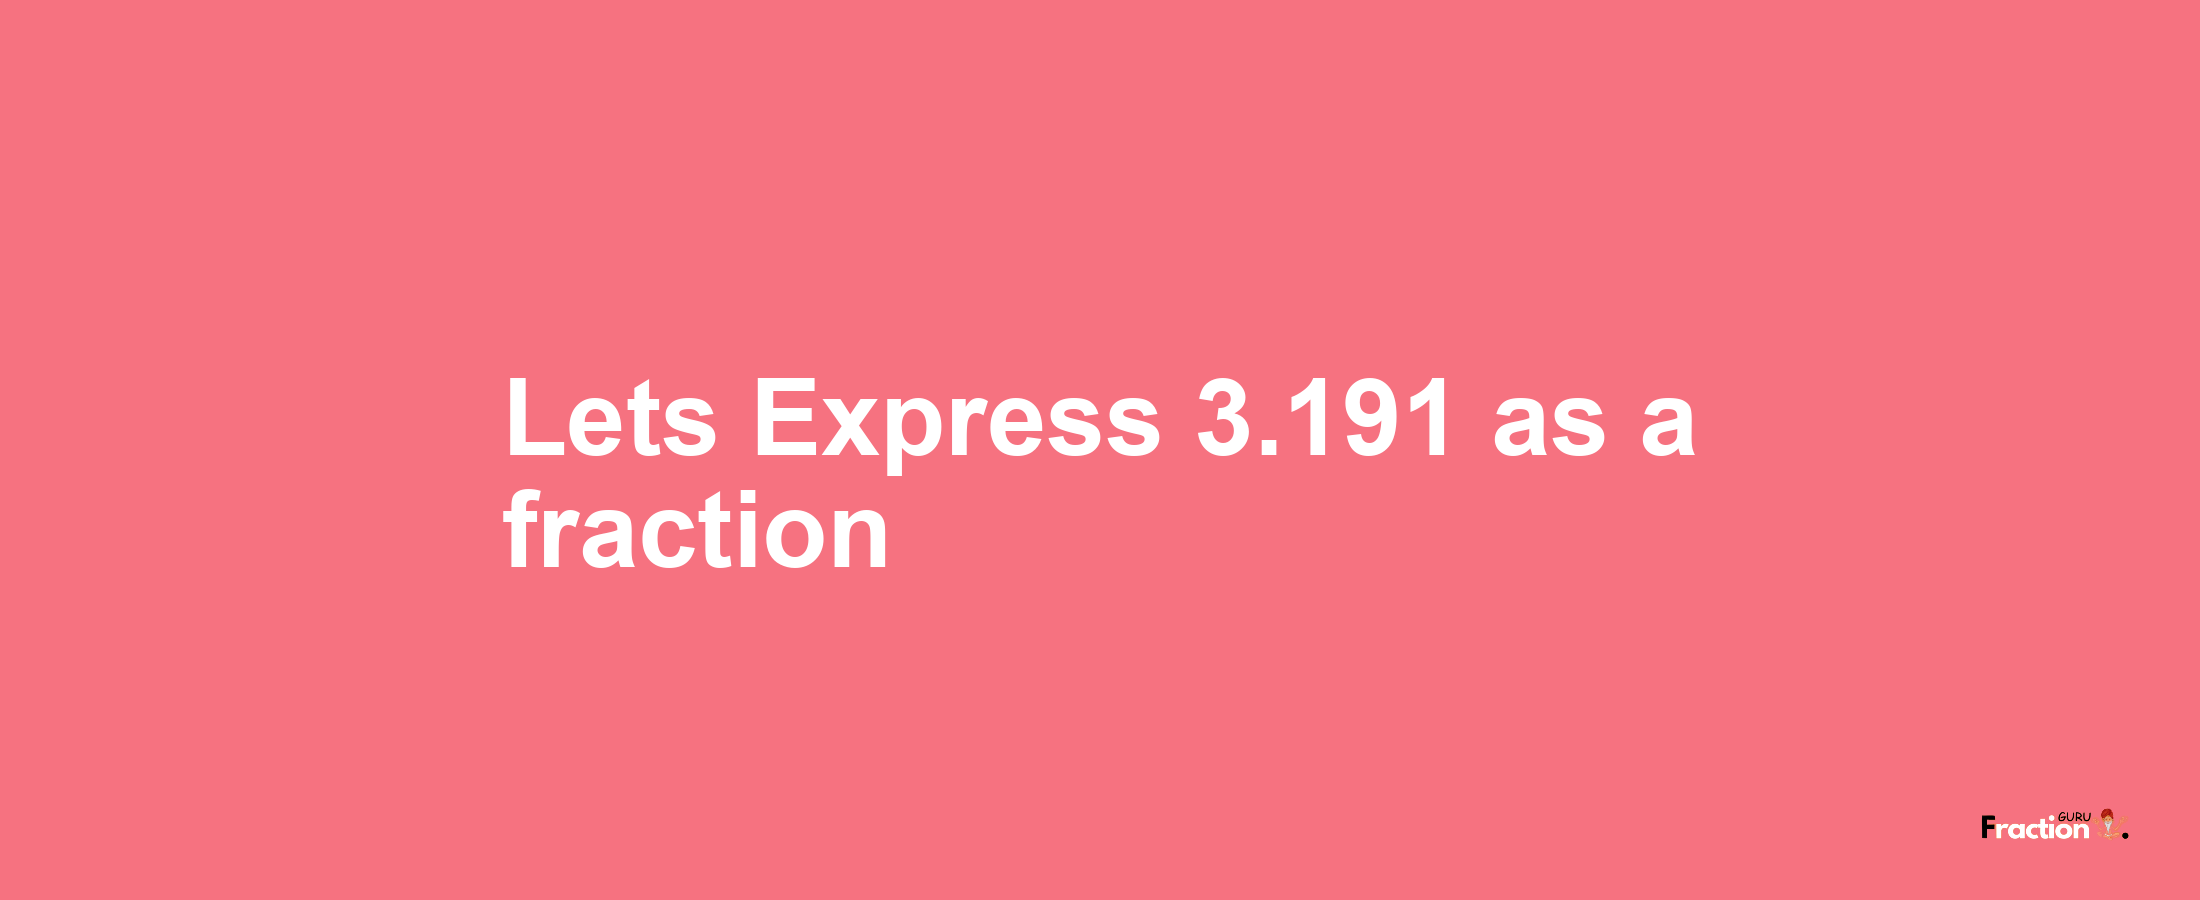 Lets Express 3.191 as afraction